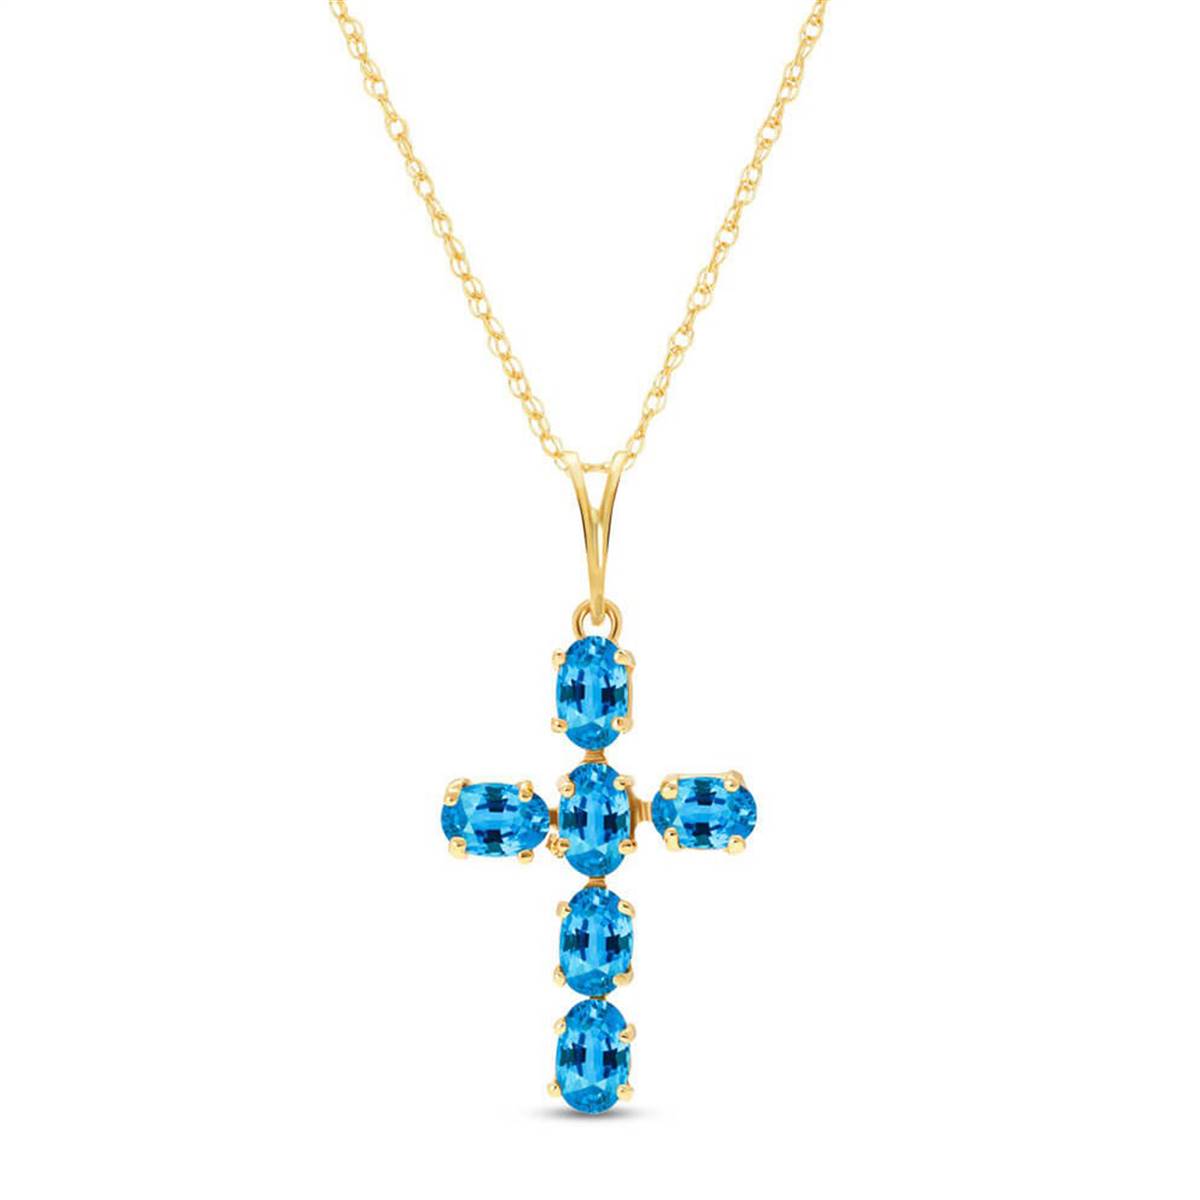 1.5 Carat 14K Solid Yellow Gold Cross Necklace Natural Blue Topaz